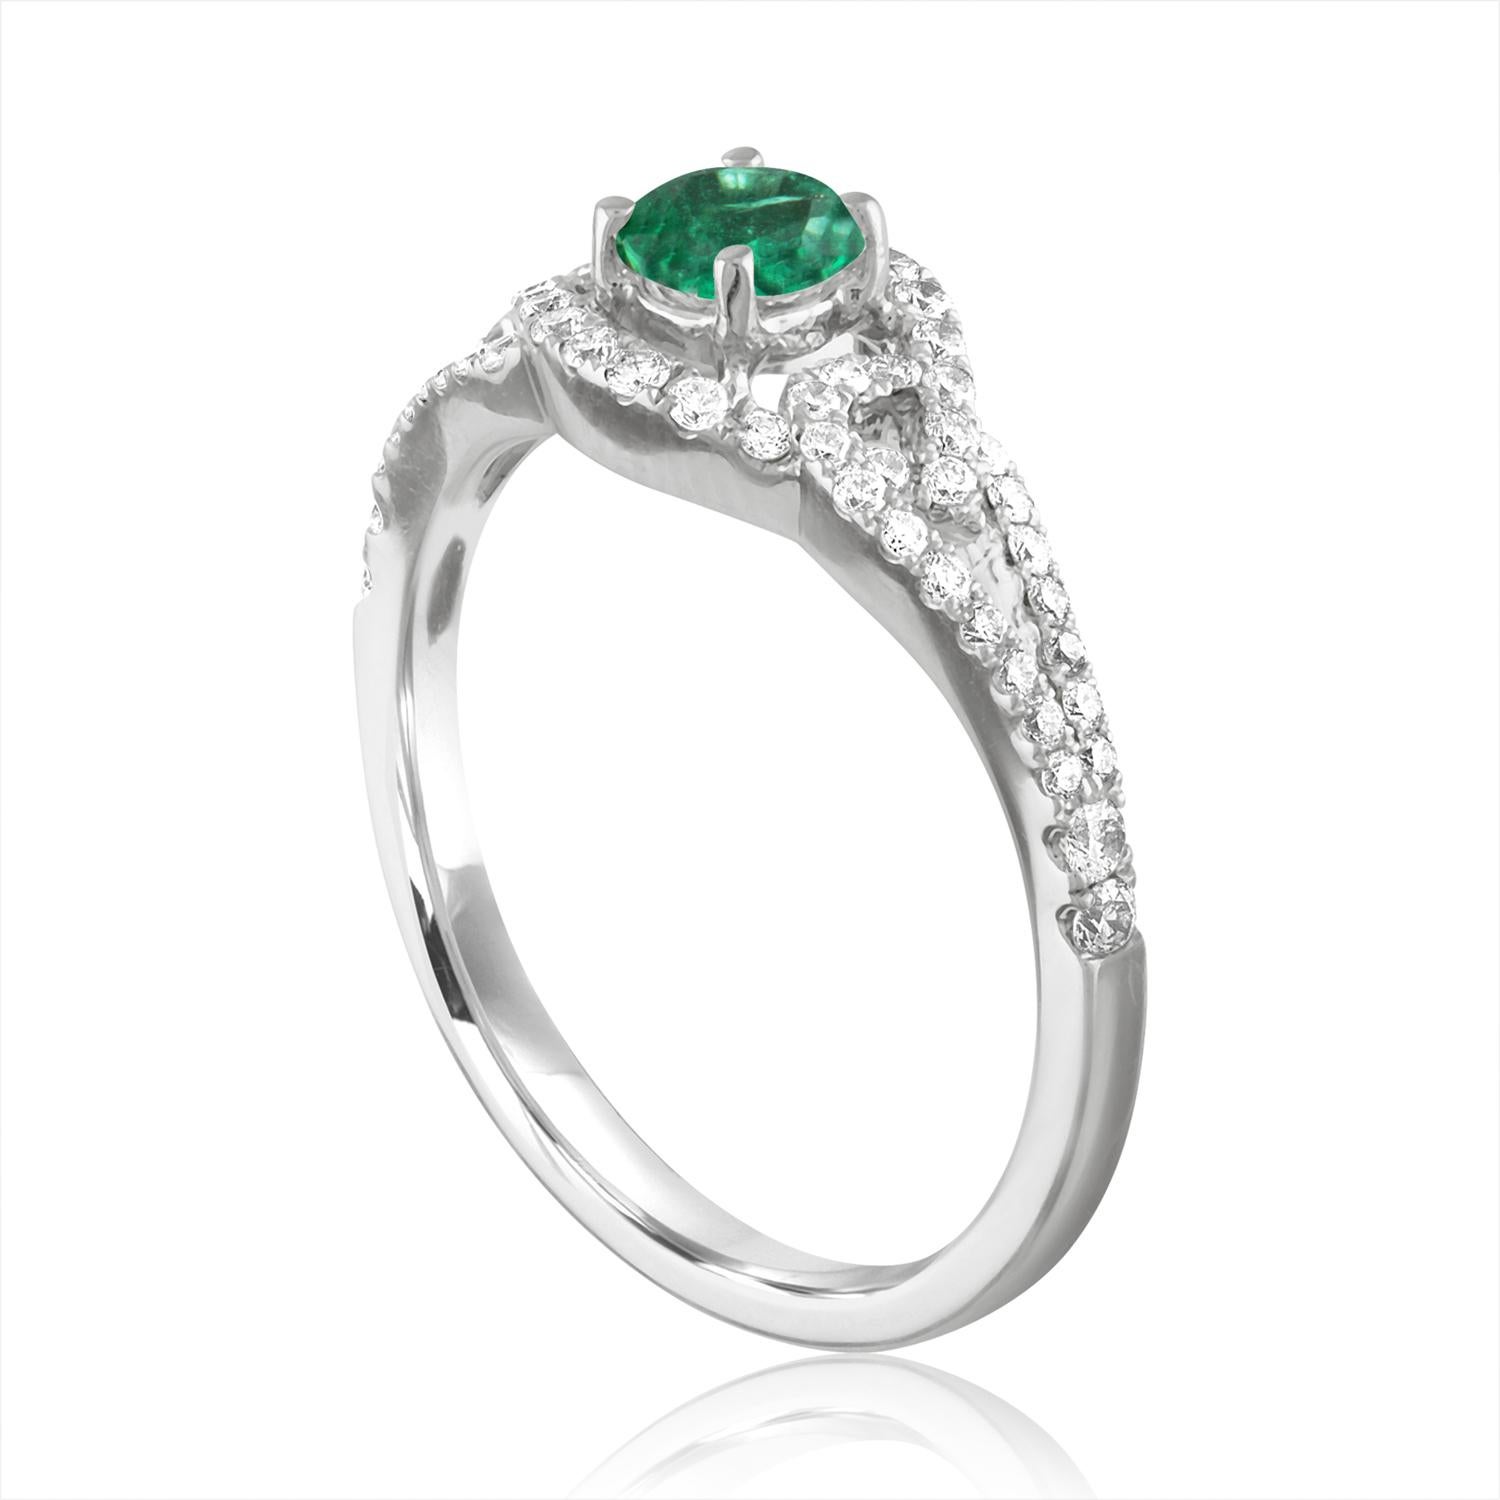 Beautiful Round Halo Criss Cross Shank Emerald Ring
The ring is 18K White Gold.
The Center is a beautiful Round cut 0.28 Carat Emerald.
The Emerald is AGL certified.
There are 0.45 Carats in Diamonds F/G VS/SI
The ring is a size 6.50, sizable.
The